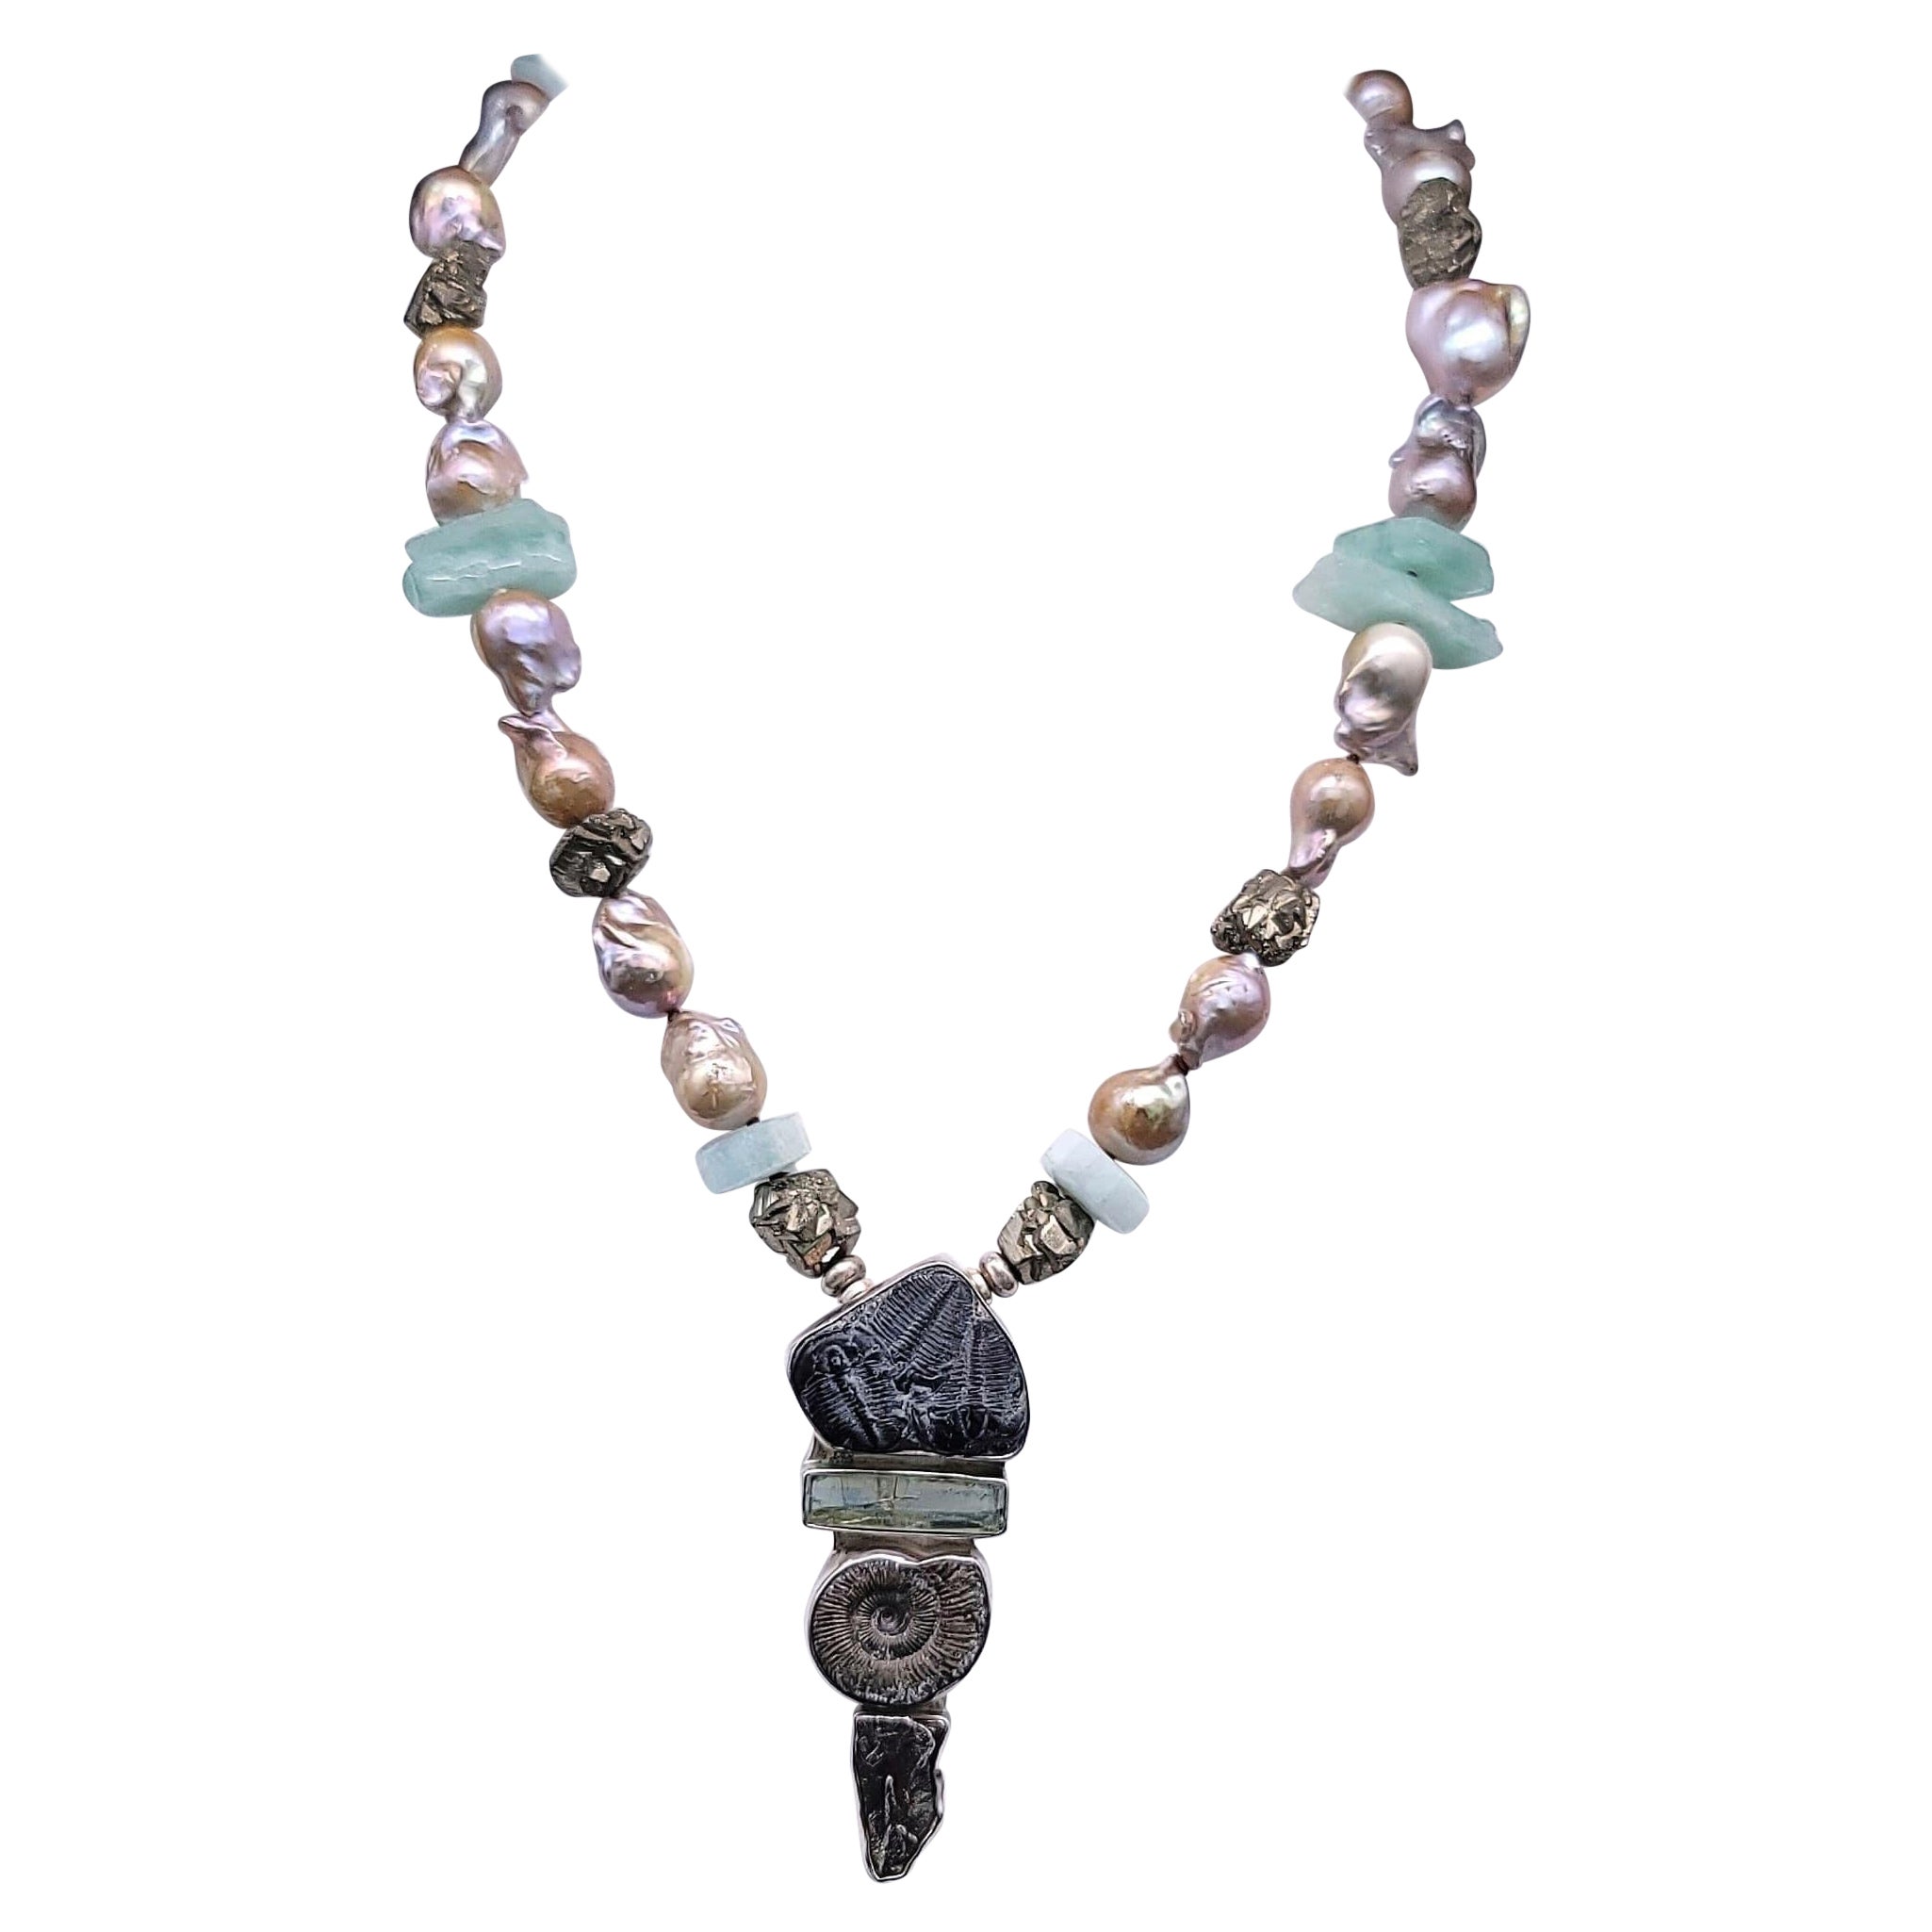 A.Jeschel Baroque Pearl and Aquamarine Necklace with Fine Roman Glass Pendant.